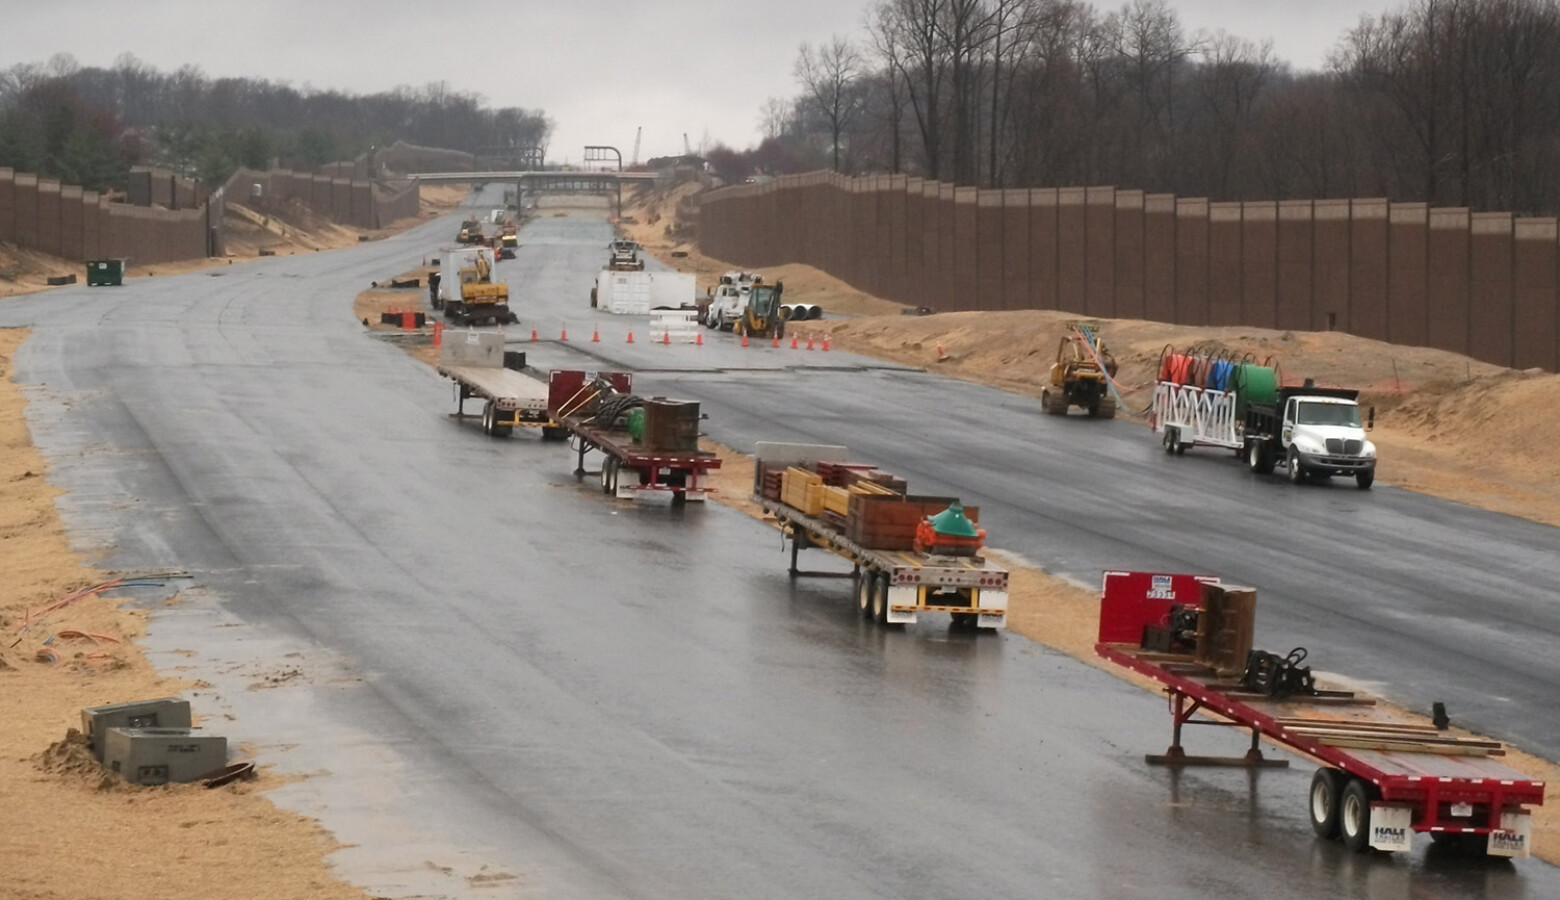 Indiana lawmakers have authored legislation to allow traffic cameras in highway work zones several years in a row, without success. (Doug Kerr/Flickr)